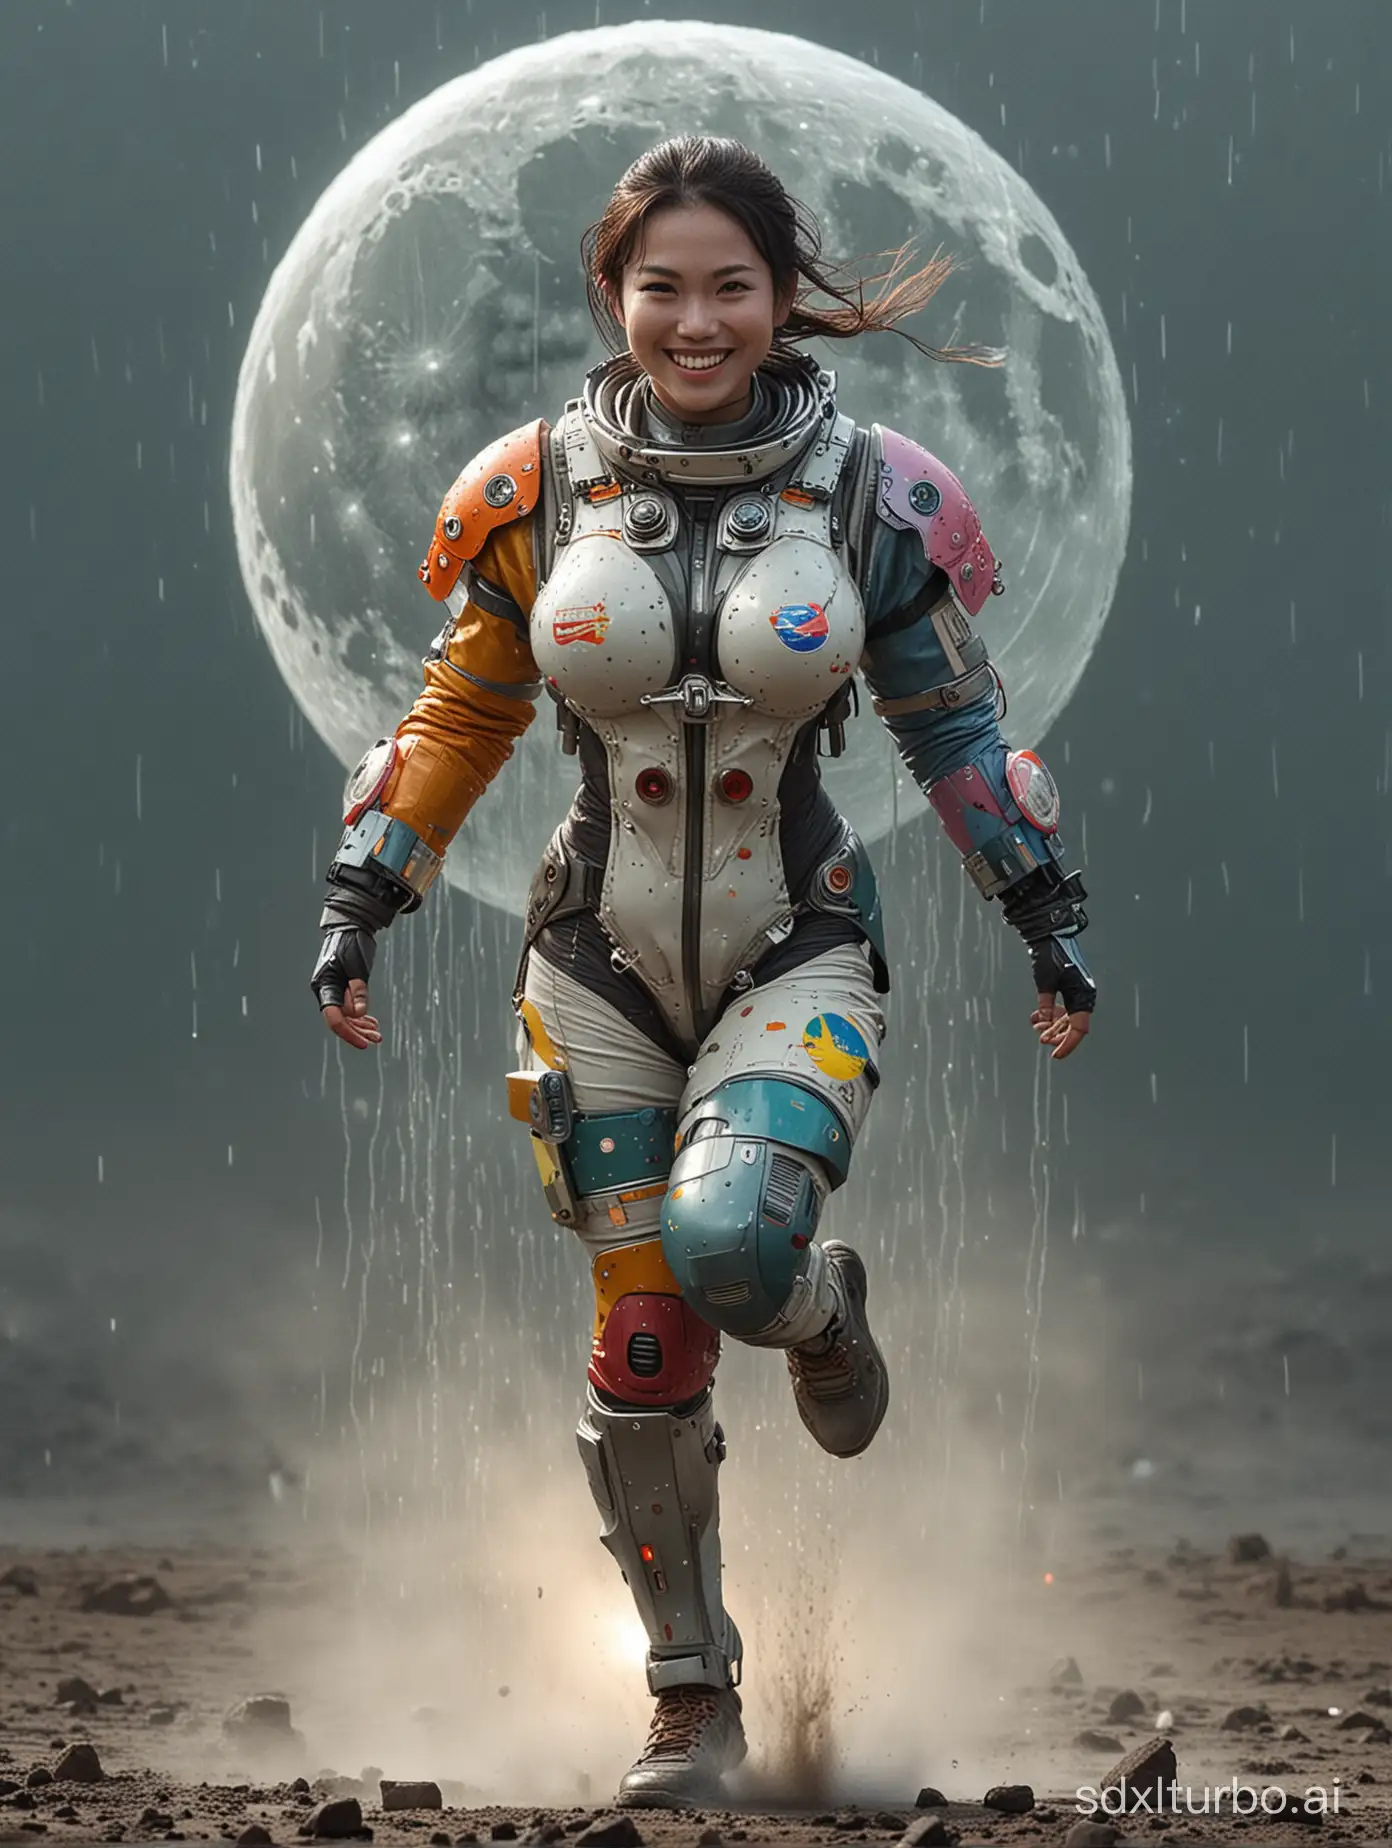 Vietnamese-Woman-Running-on-the-Moon-in-Multicolored-Mech-Suit